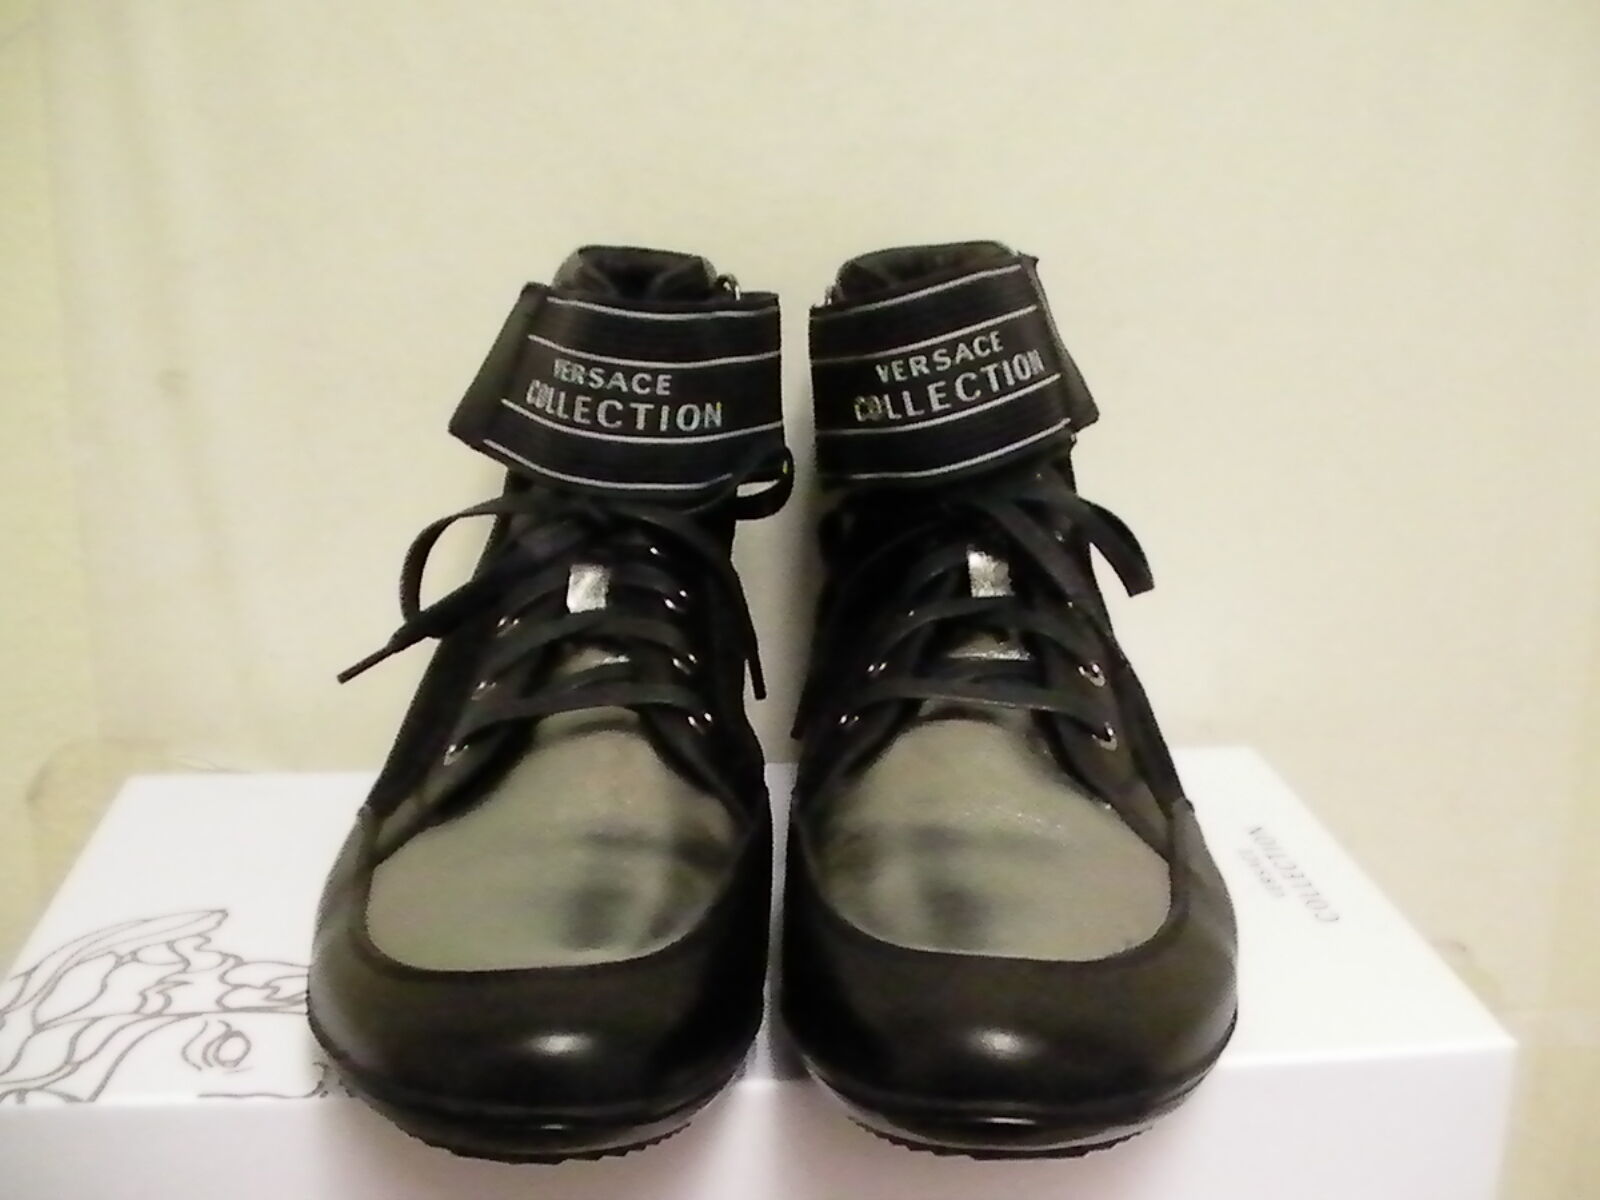 Versace collection casual High shoes size 45 euro new with box - $316.75